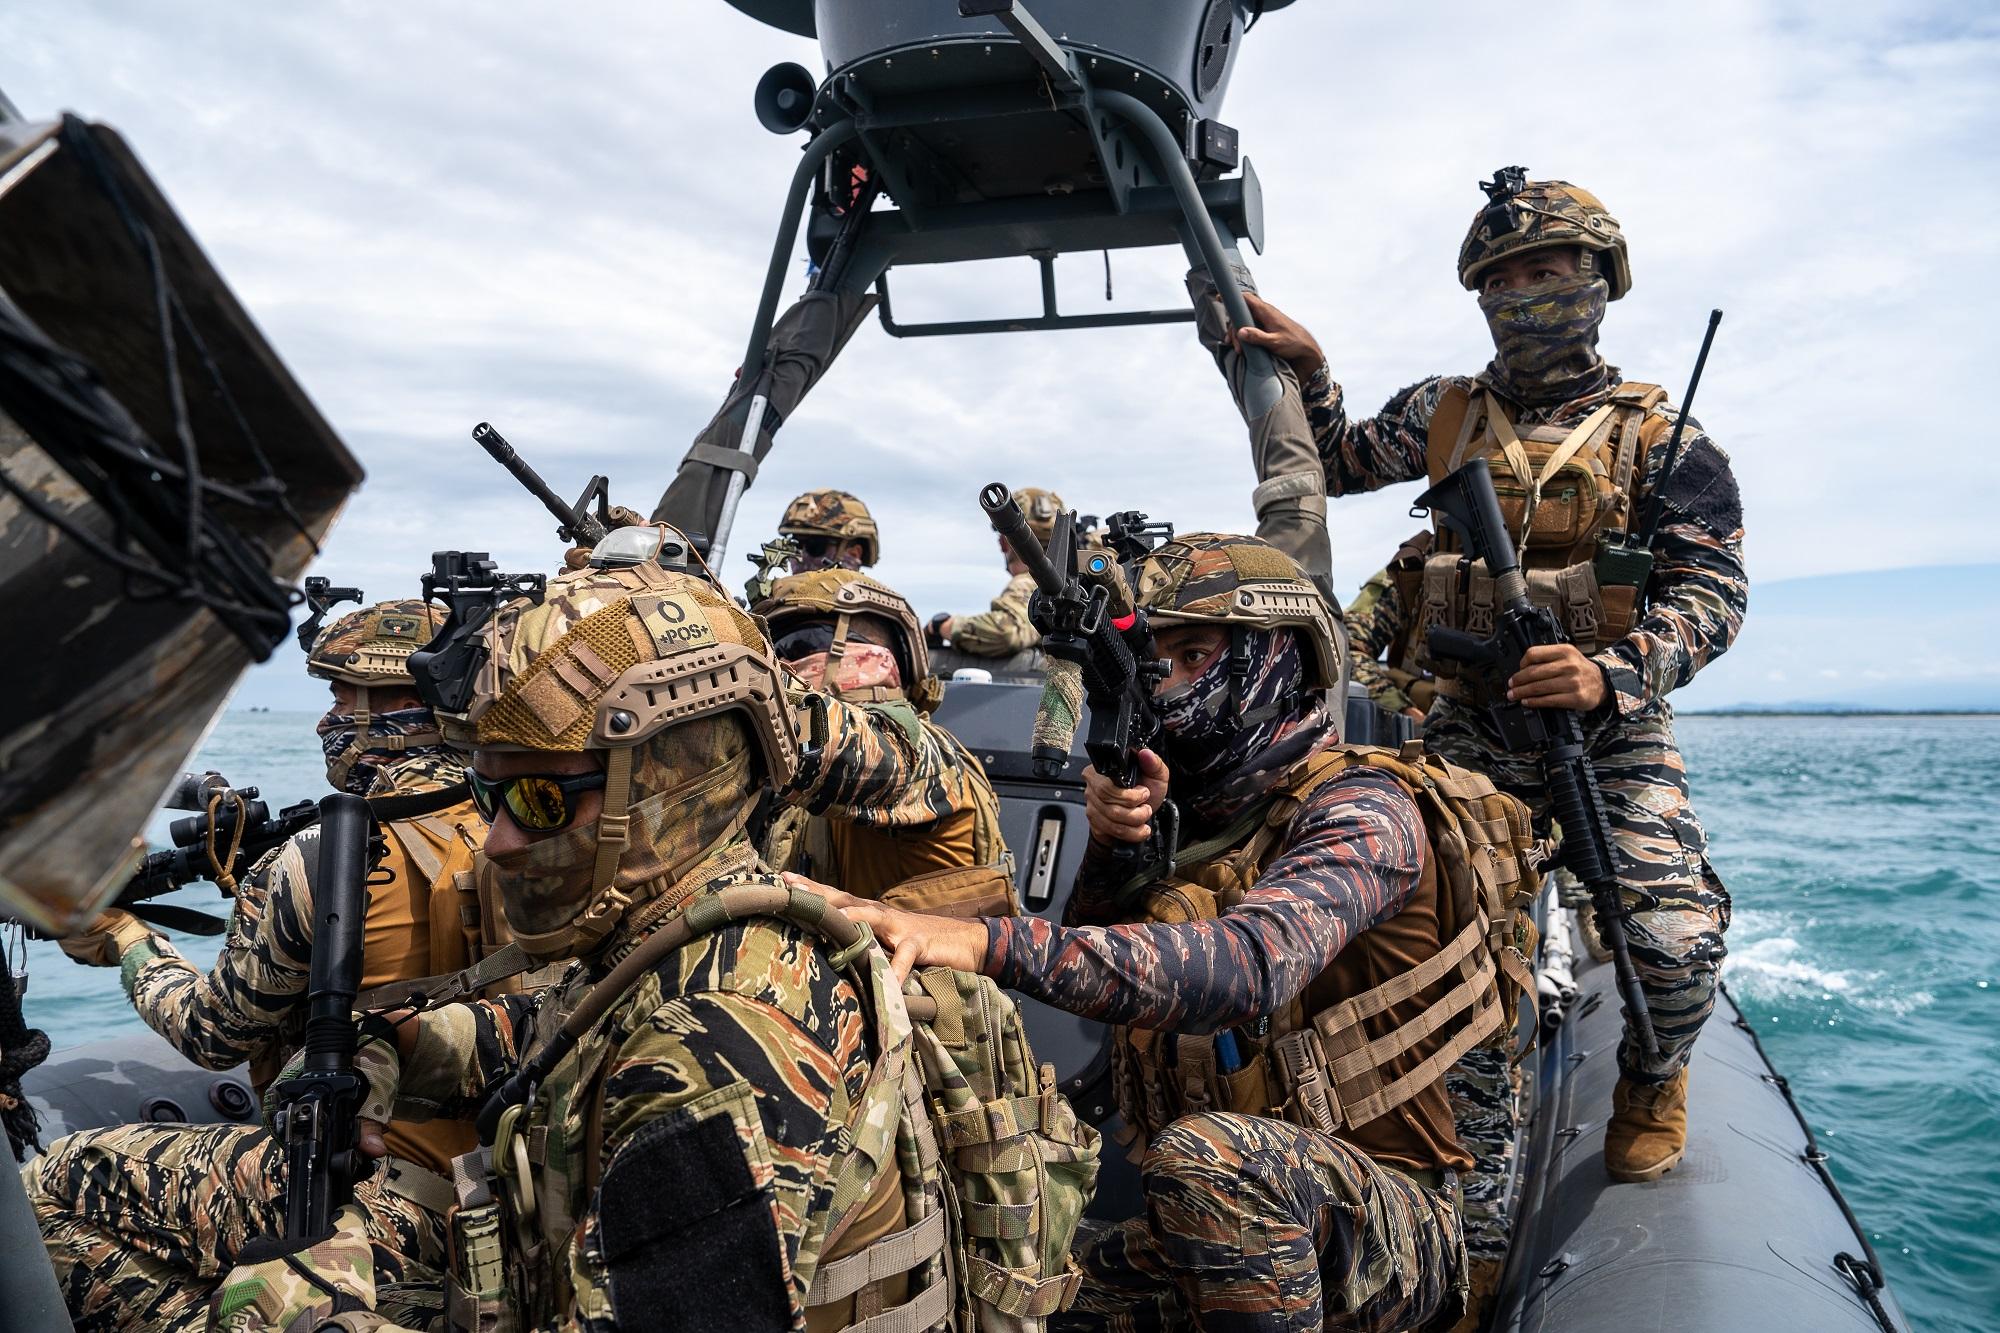 Service members form the Philippine Naval Special Operation Command and U.S. Special Operations Task Force 511.2 patrol in the Basilan Strait during a Joint Maritime Security Training Exercise conducted throughout the Sulu Archipelago, Philippines, Nov. 22, 2023.